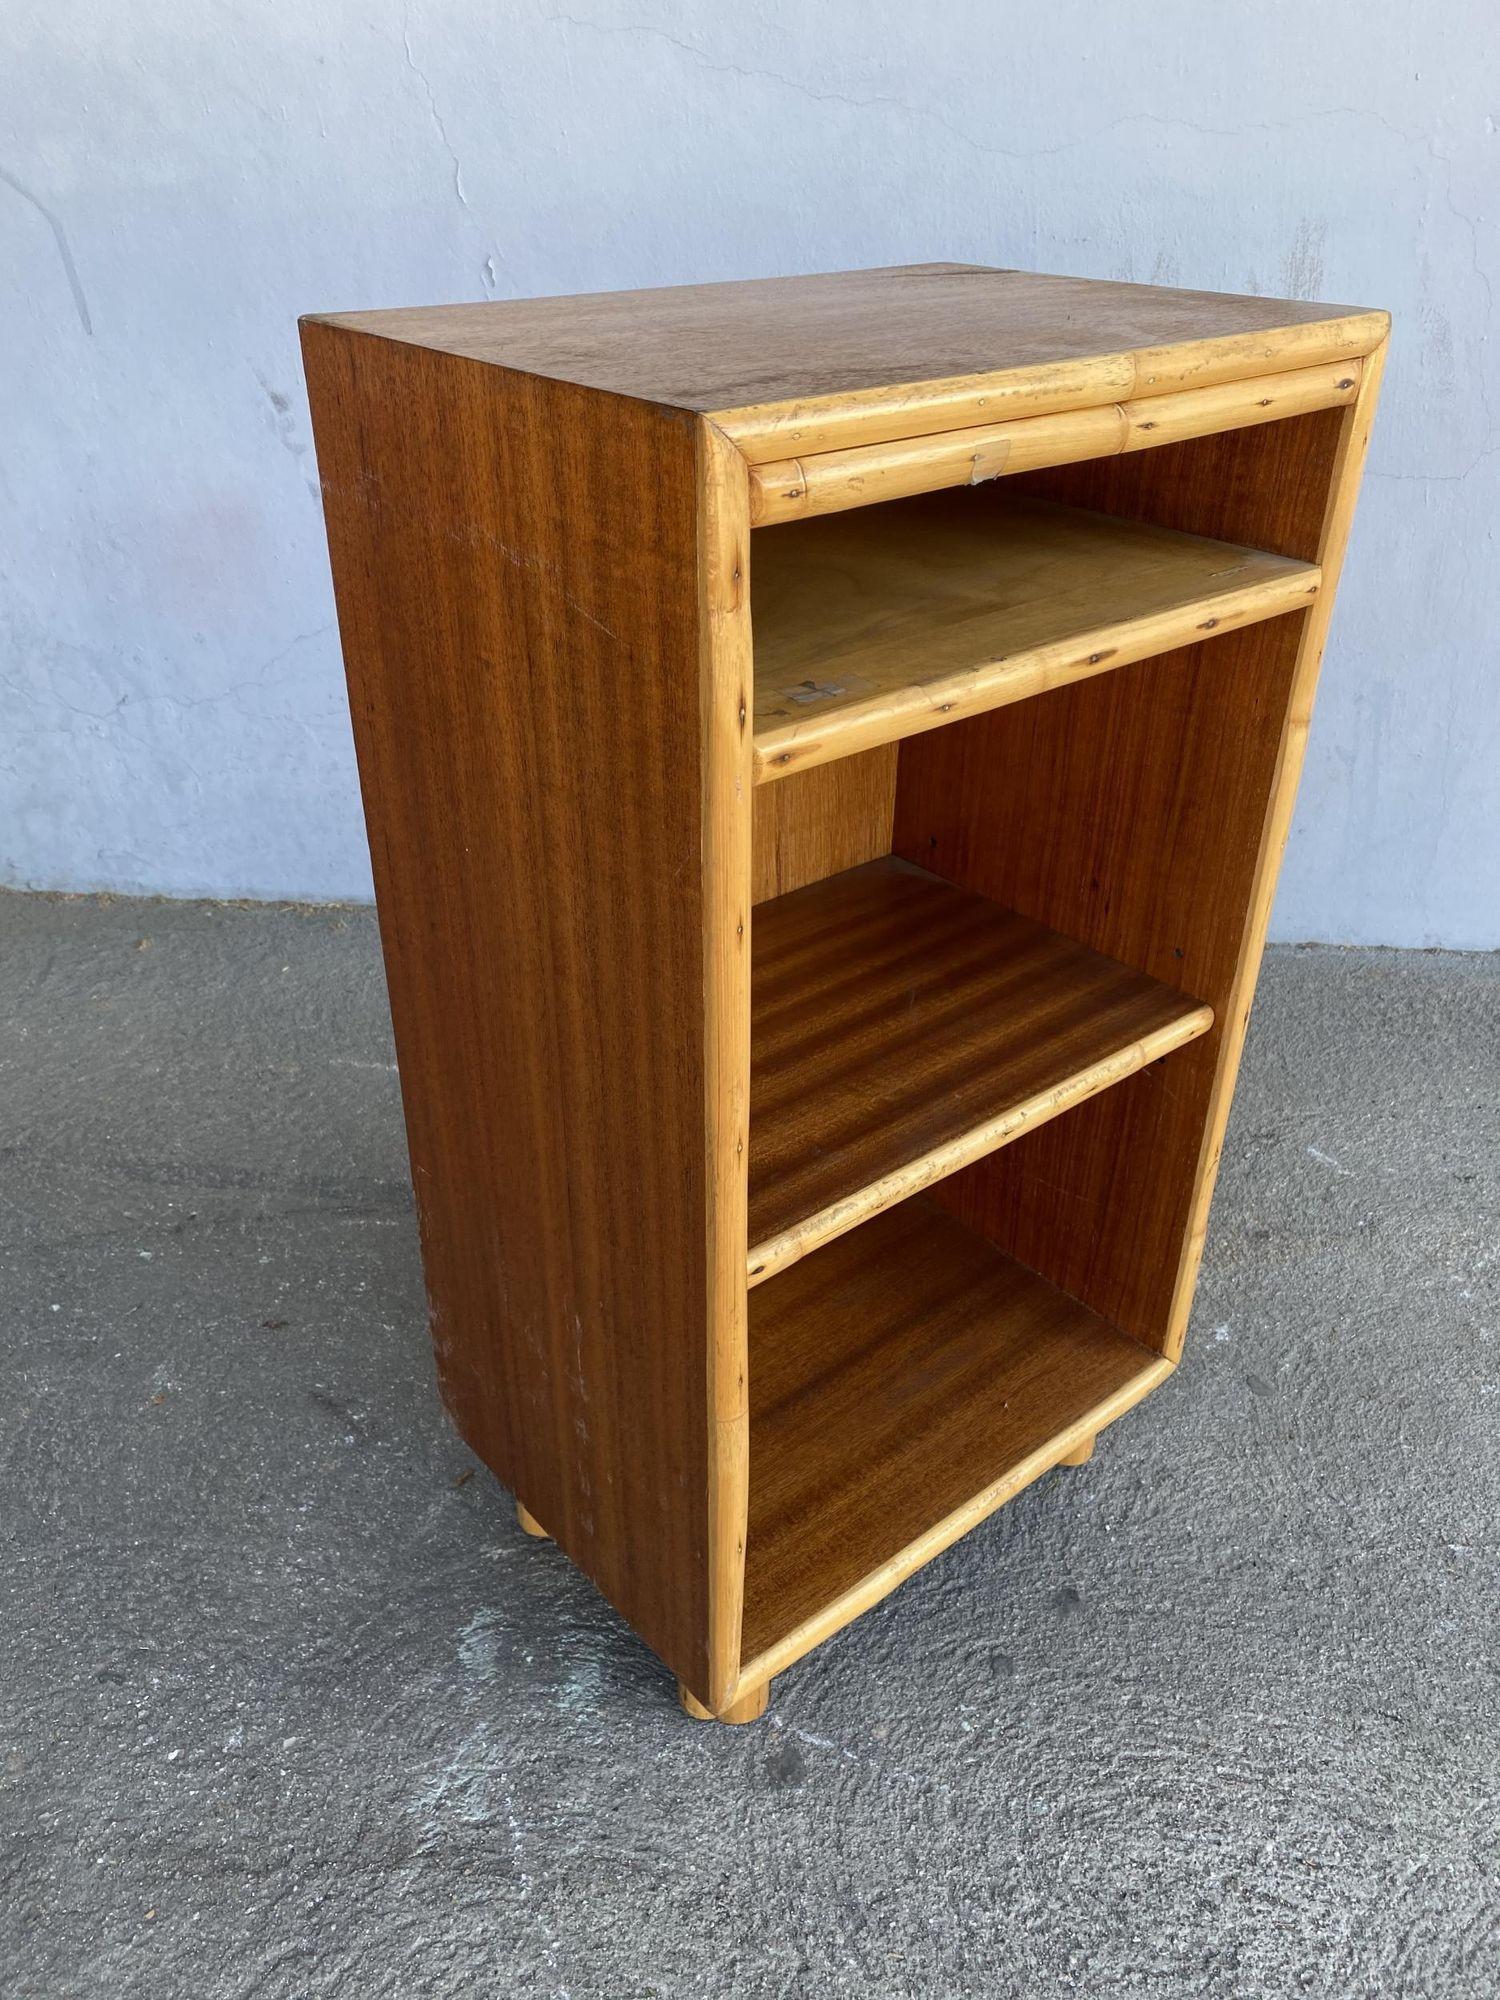 Restored post-war mahogany bedside table with rattan border featuring 3 shelves for storage.

Restored to new for you.

All rattan, bamboo, and wicker furniture has been painstakingly refurbished to the highest standards with the best materials.